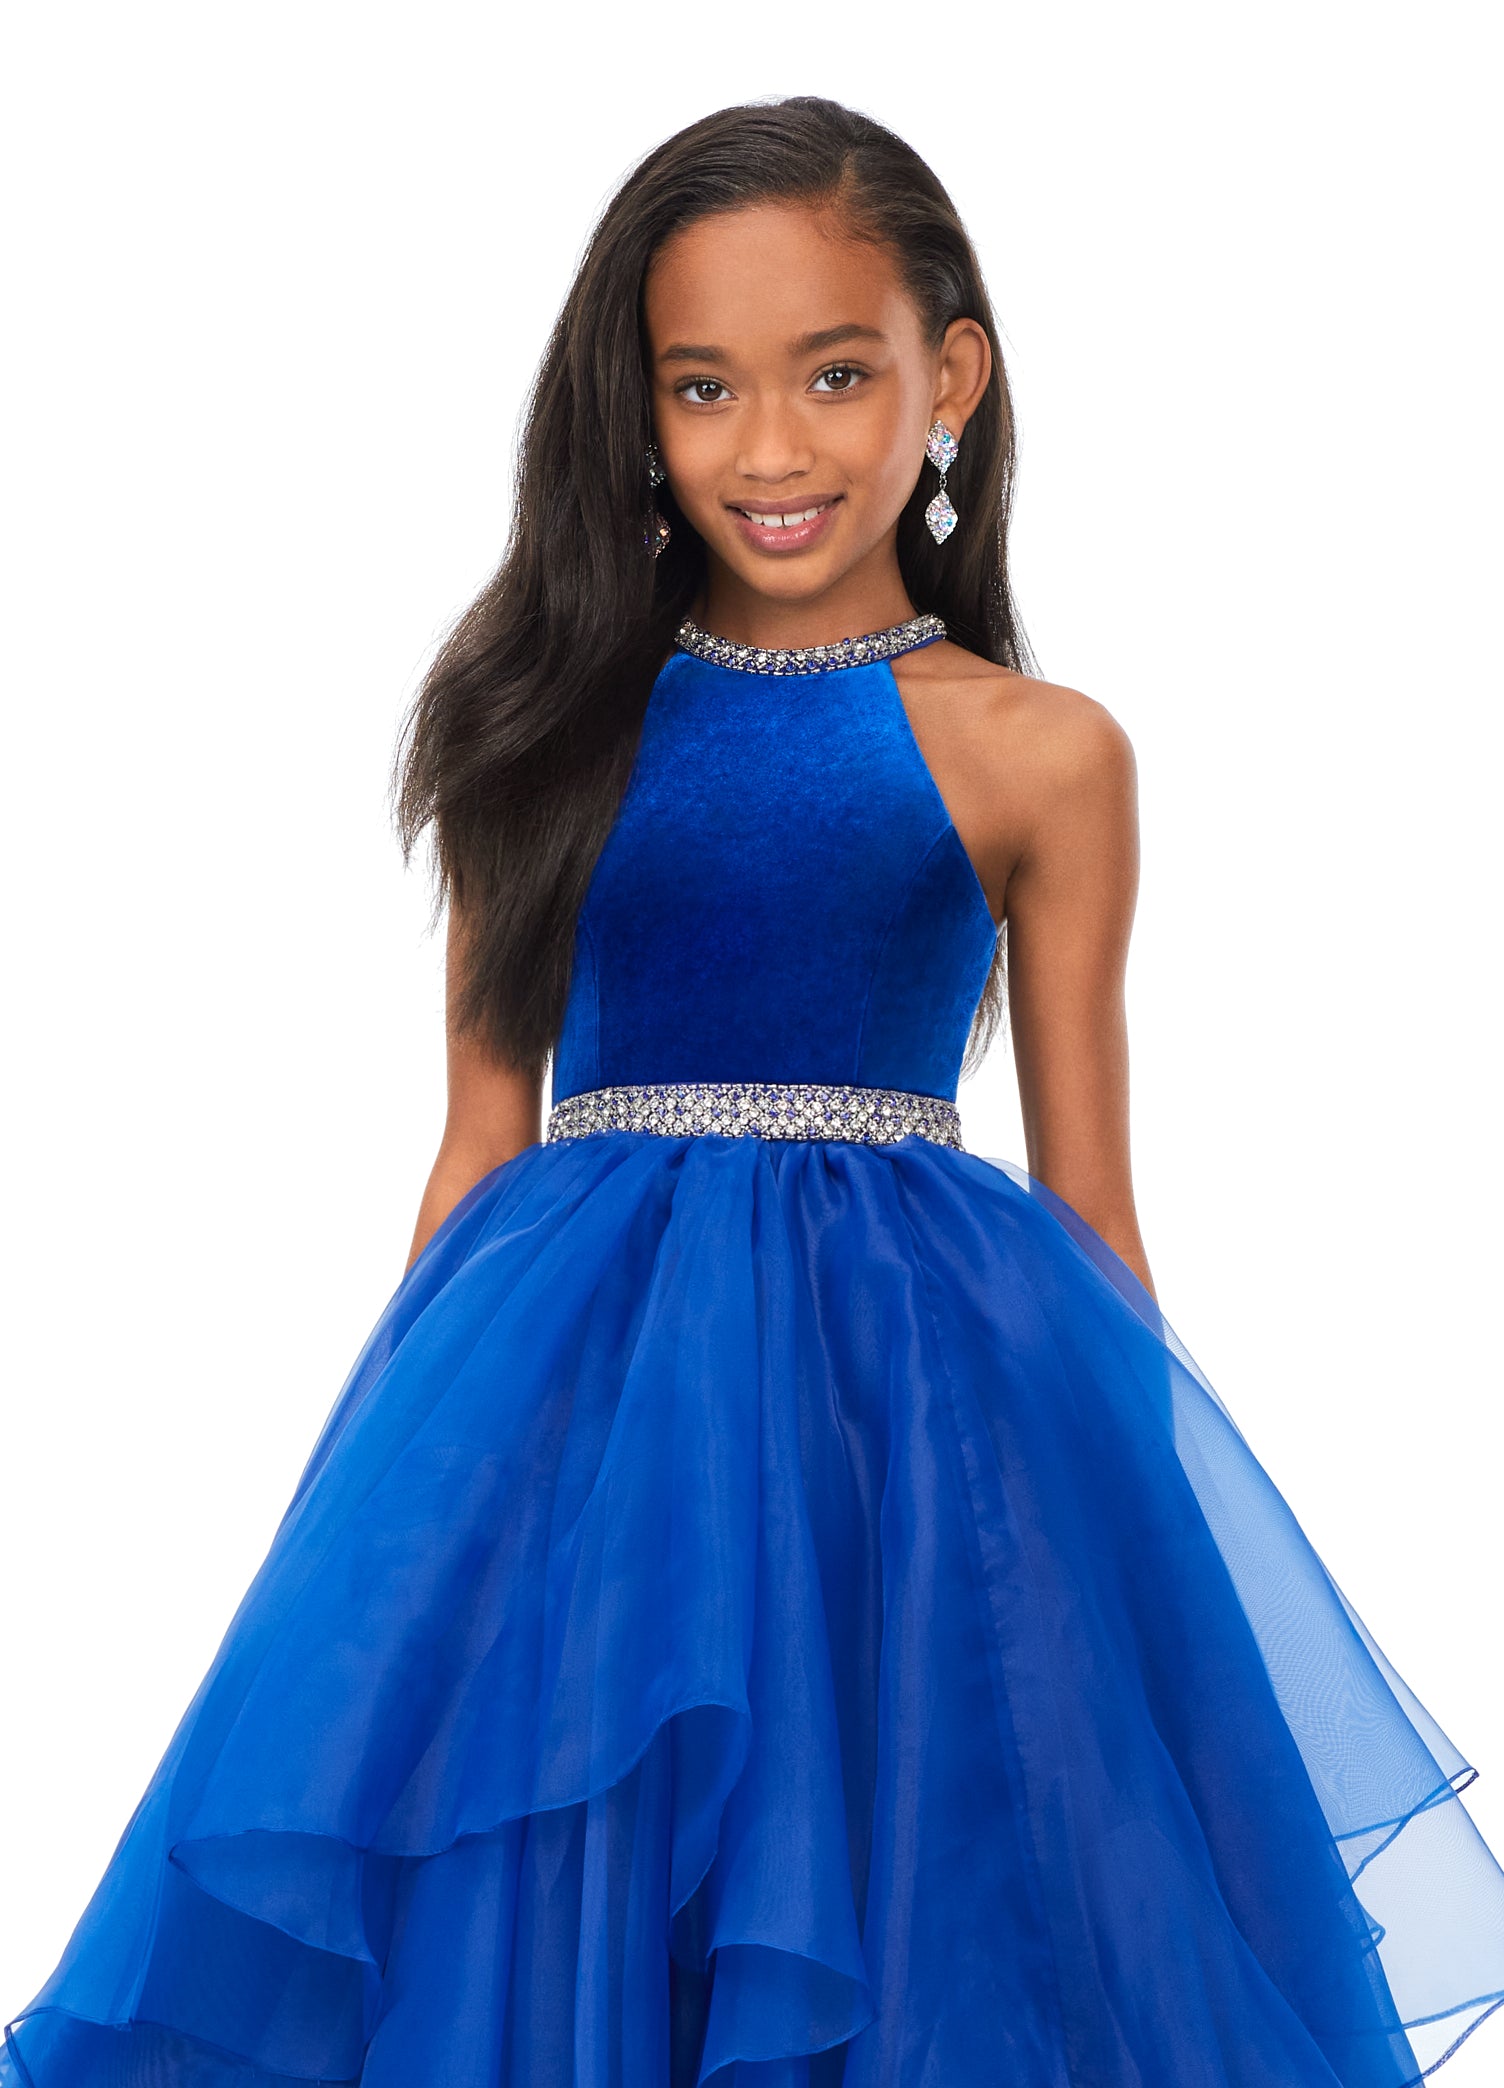 Ashley Lauren Kids 8179 Girls Halter Ball Gown Pageant Dress with Handkerchief Skirt   This kids halter style ball gown is accented with a velvet bodice. The neckline and waistline are embellished with crystal details. The full organza handkerchief style skirt is sure to wow!